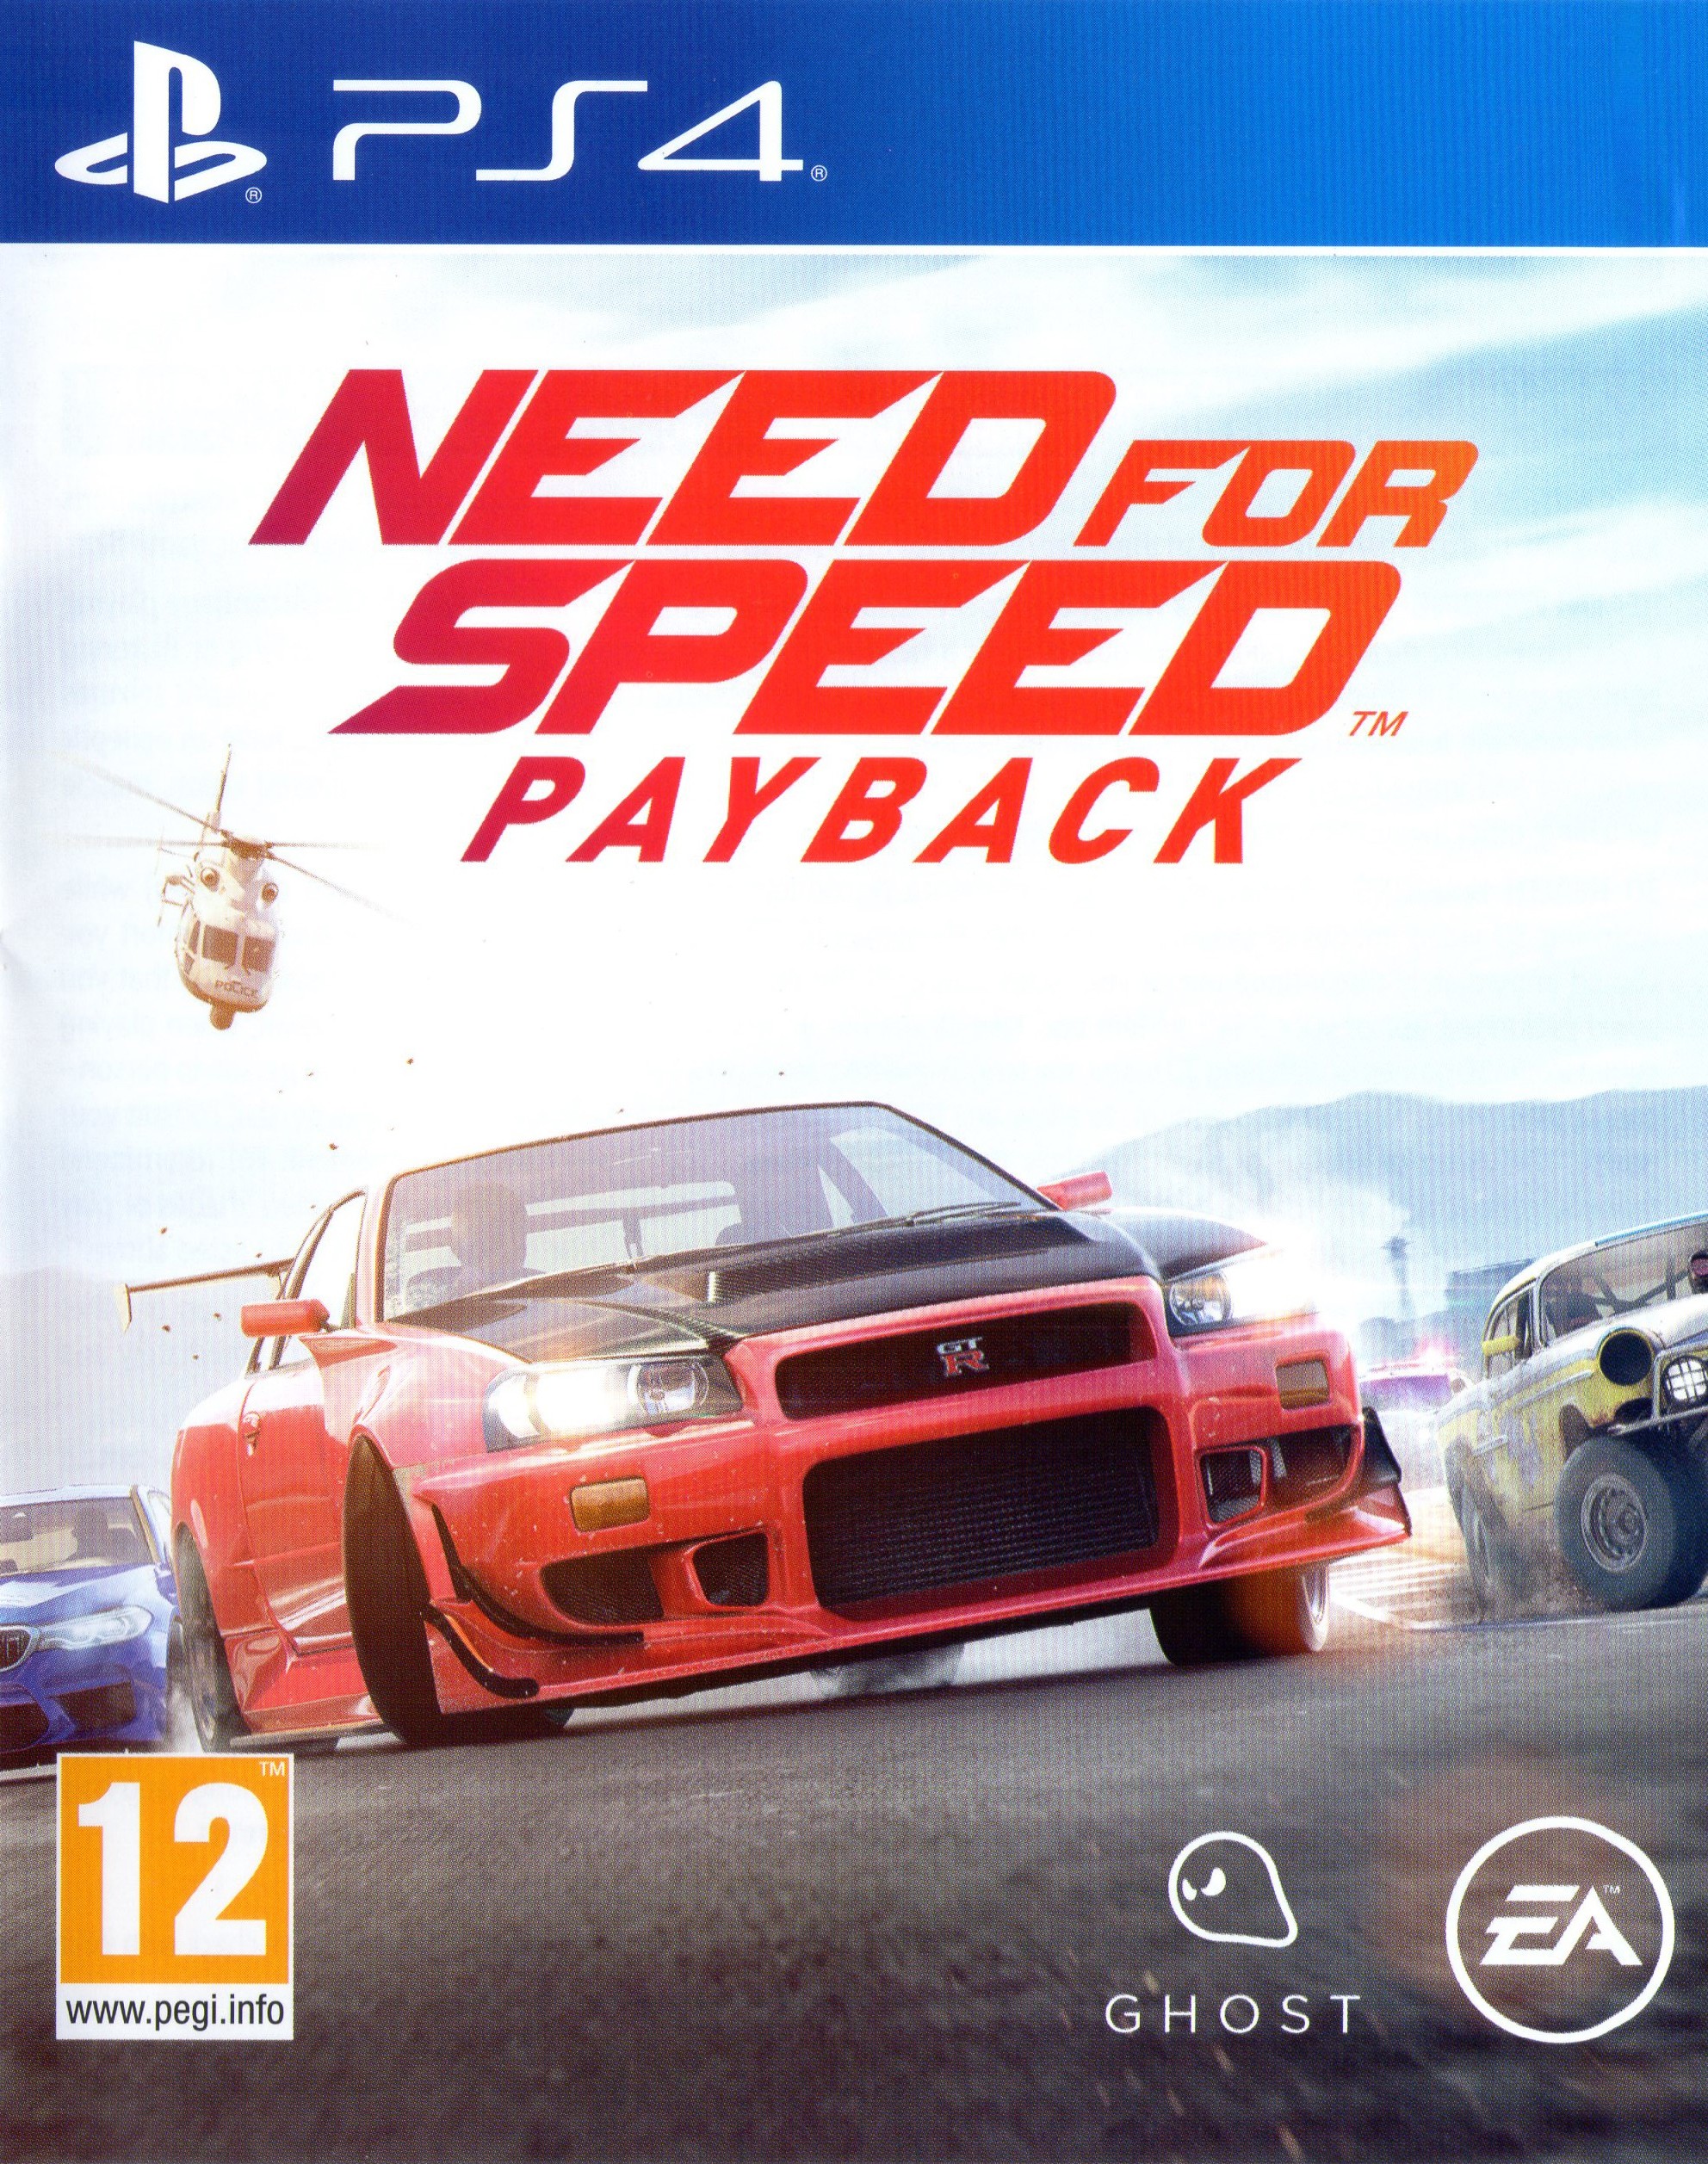 'Need for Speed: PayBack'